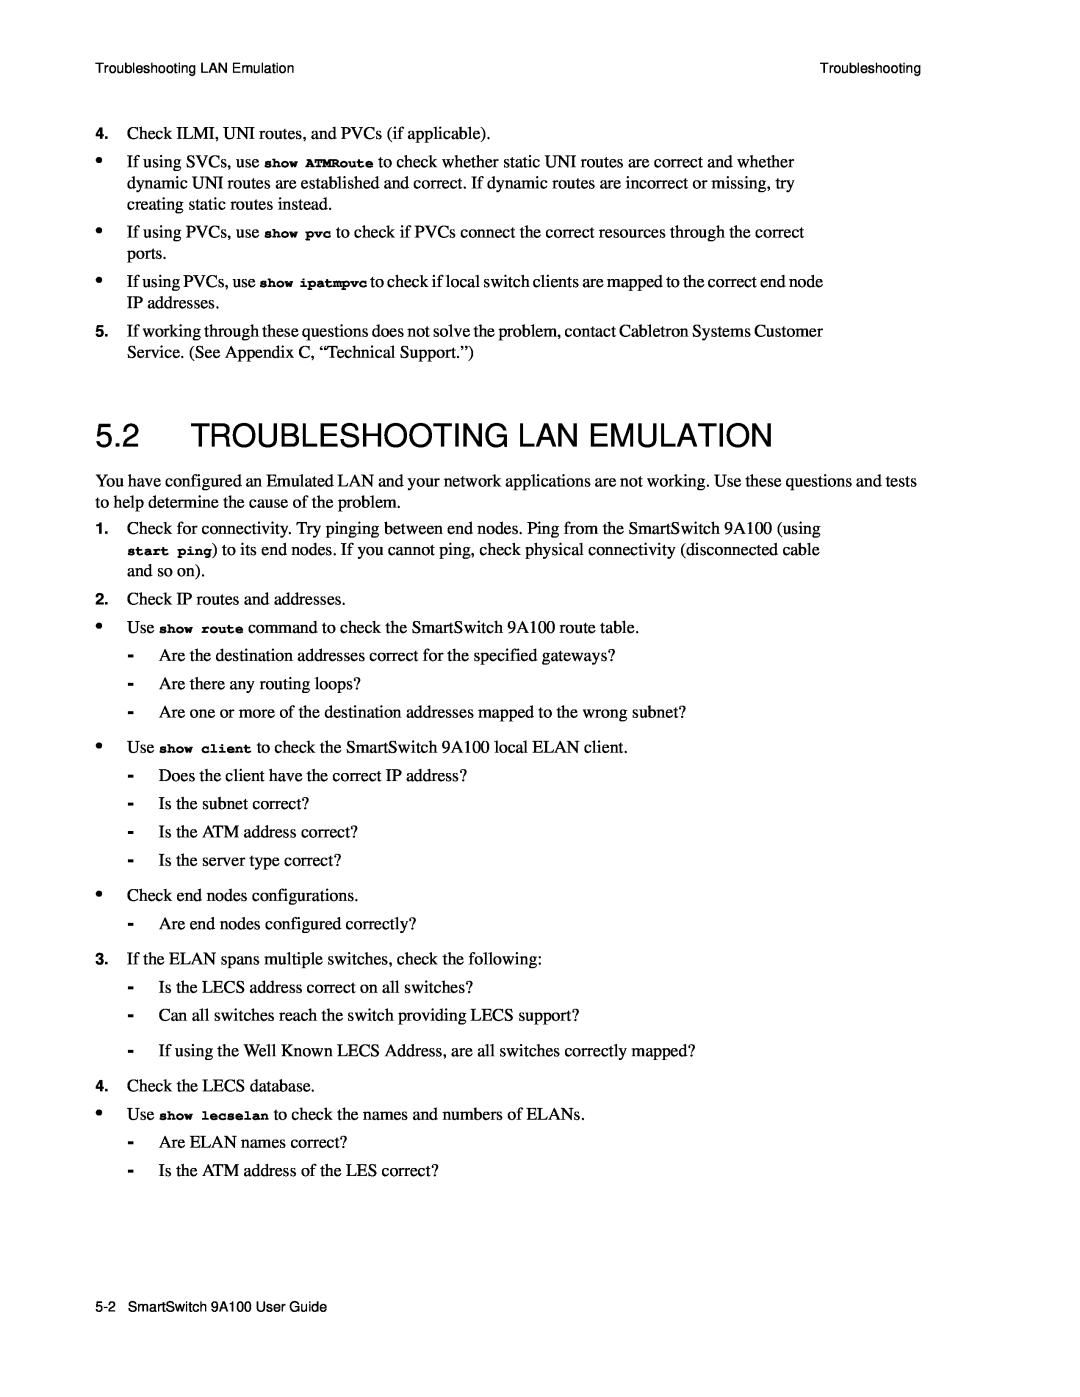 Cabletron Systems manual Troubleshooting Lan Emulation, Troubleshooting LAN Emulation, SmartSwitch 9A100 User Guide 